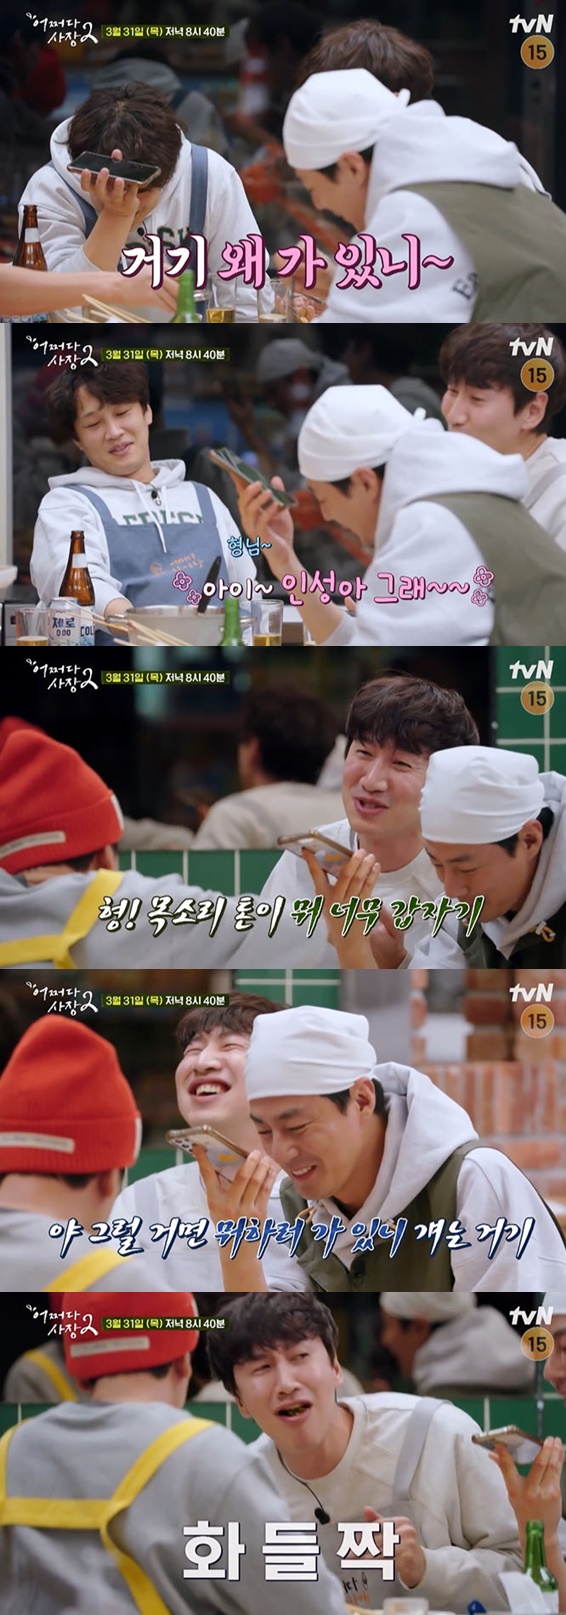 On the 24th, TVN entertainment program How the President 2 said, [Single undisclosed] Yoo Jae-Suk call connection! Lee Kwangsoo called and the response was...?(ft. Yuzagi Eosajang 2 is a story that almost comes out) In the video, Jo In-sung and Cha Tae-hyunun, who are pre-meeting, were included.Jo In-sung laughed at Cha Tae-hyun, who calls to join Yoo Jae-Suk, saying, We will be sick of it now.Yoo Jae-Suk replied to the question, What are you doing in the neck, in the gold? On Thursday, I shoot What are you doing when you play; Cha Tae-hyunun said, What are you doing when you play?He said, Mr. Ai and he said a harsh word, causing a laugh.Cha Tae-hyunun said, Check it on January 21st. Im sorry, but my brother is Plan B.Yoo Jae-Suk said, Cha Tae-hyun is very blocking. He said, I am comfortable because it is Plan B.Cha Tae-hyunun explained that it is so desperate to build Plan B, and Yoo Jae-Suk agreed.Jo In-sung said, Do not be sad even if you do not call me. Yoo Jae-Suk said, Hey...Jo In-sung.Cha Tae-hyunun called Yoo Jae-Suk after the end of the business; when he said Anything A was decided, Yoo Jae-Suk asked, Who is it?When Cha Tae-hyunun replied, I cant teach you, Yoo Jae-Suk said, Youre a bit like that.I do not, and you go to the Kahn, he laughed with anger.Cha Tae-hyun said, I have a brother. When Changsoo changed, Yoo Jae-Suk said, Personality? My brother is personality.Yoo Jae-Suk said in the voice of Kwangsoo, Who are you? And even though he was joking, Kwangsoo, why are you there?When Jo In-sung changed the phone, Kwangsoo said, The tone of voice changes.Jo In-sung said, I only did Hello at the end of Yoo Jae-Suk, He is basic.Kwangsoo took charge of the casser, said Yoo Jae-Suk, who added, If you cook it, it is a disaster. Yoo Jae-Suk said, If you do, why is he going there?Yoo Jae-Suk said, She has been sick of actors these days. You should make Kwangsoo a little better.Kwangsoo was surprised to see that he could not swallow the food in his mouth.Yoo Jae-Suk also welcomed Kim Woo-bin, who appeared on the air for a long time.There is also Lim Joo-hwan, Yoo Jae-Suk said, It was a disaster, he said, why is Kwangsoo in the meantime?I know what role Kwangsoo plays, he said, adding, Its not a hue, its a hue.Everyone has suffered and if you are bored, call again, said Yoo Jae-Suk, who encouraged the cast, bring in the Prince of Girona specialties.I will match the Providence of Girona ship for 300,000 won, he said, a little sales, he said, you have changed a lot, he said.If you have 300,000 won worth of the Providence of Girona ship in front of your house, you know we sent it, he said, then I buy it.It was a warm-hearted response.Yoo Jae-Suk concluded the call with the words I would like to ask Kwangsoo well and expressed his affection for Kwangsoo.Photo = Naver TV